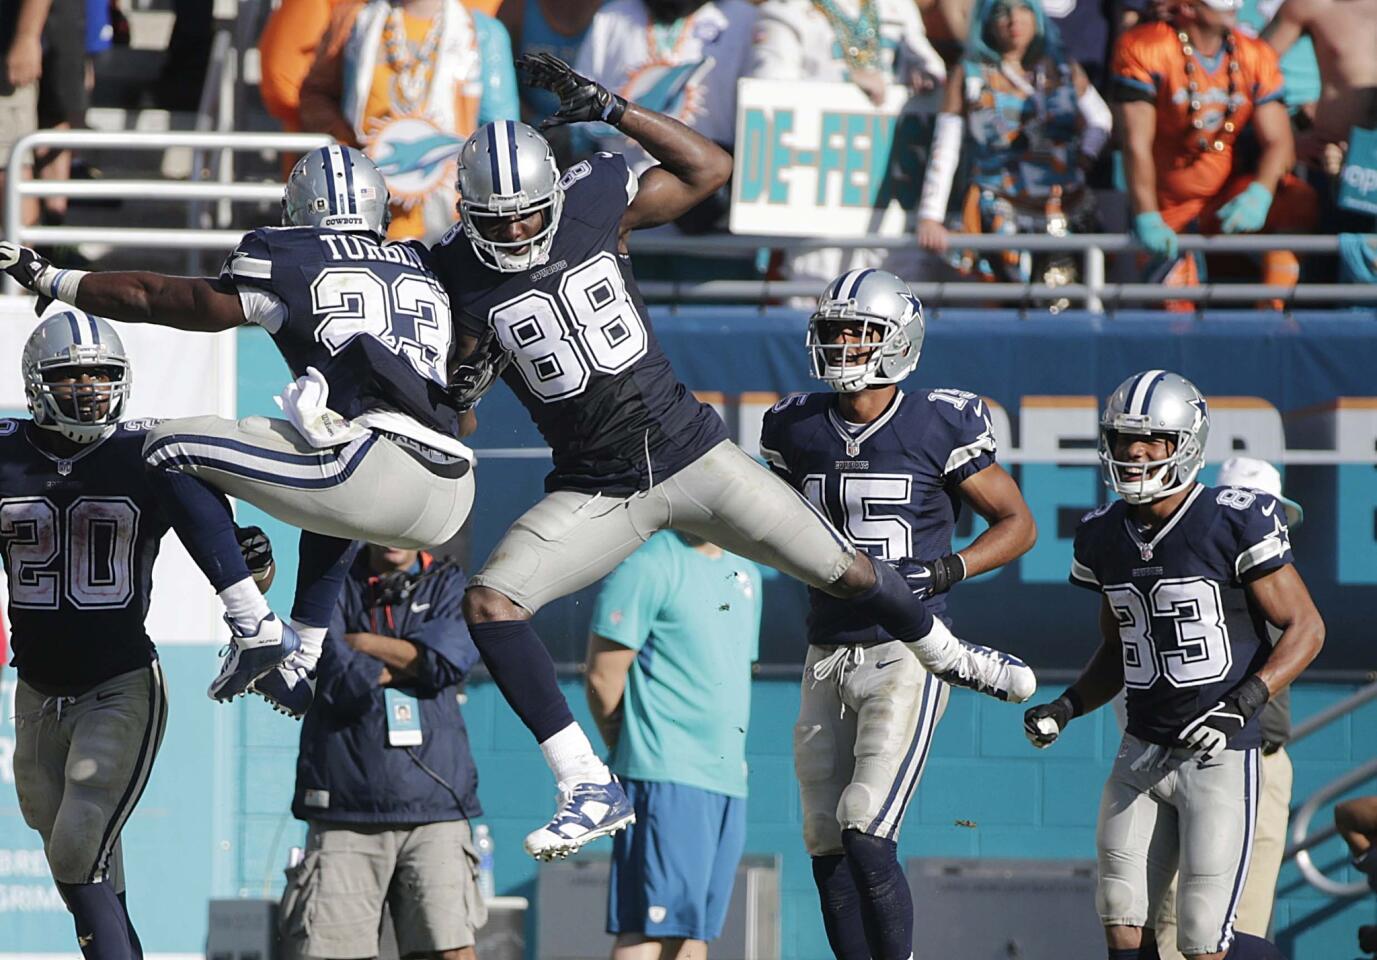 Dez Bryant probably gained special satisfaction with his winning touchdown